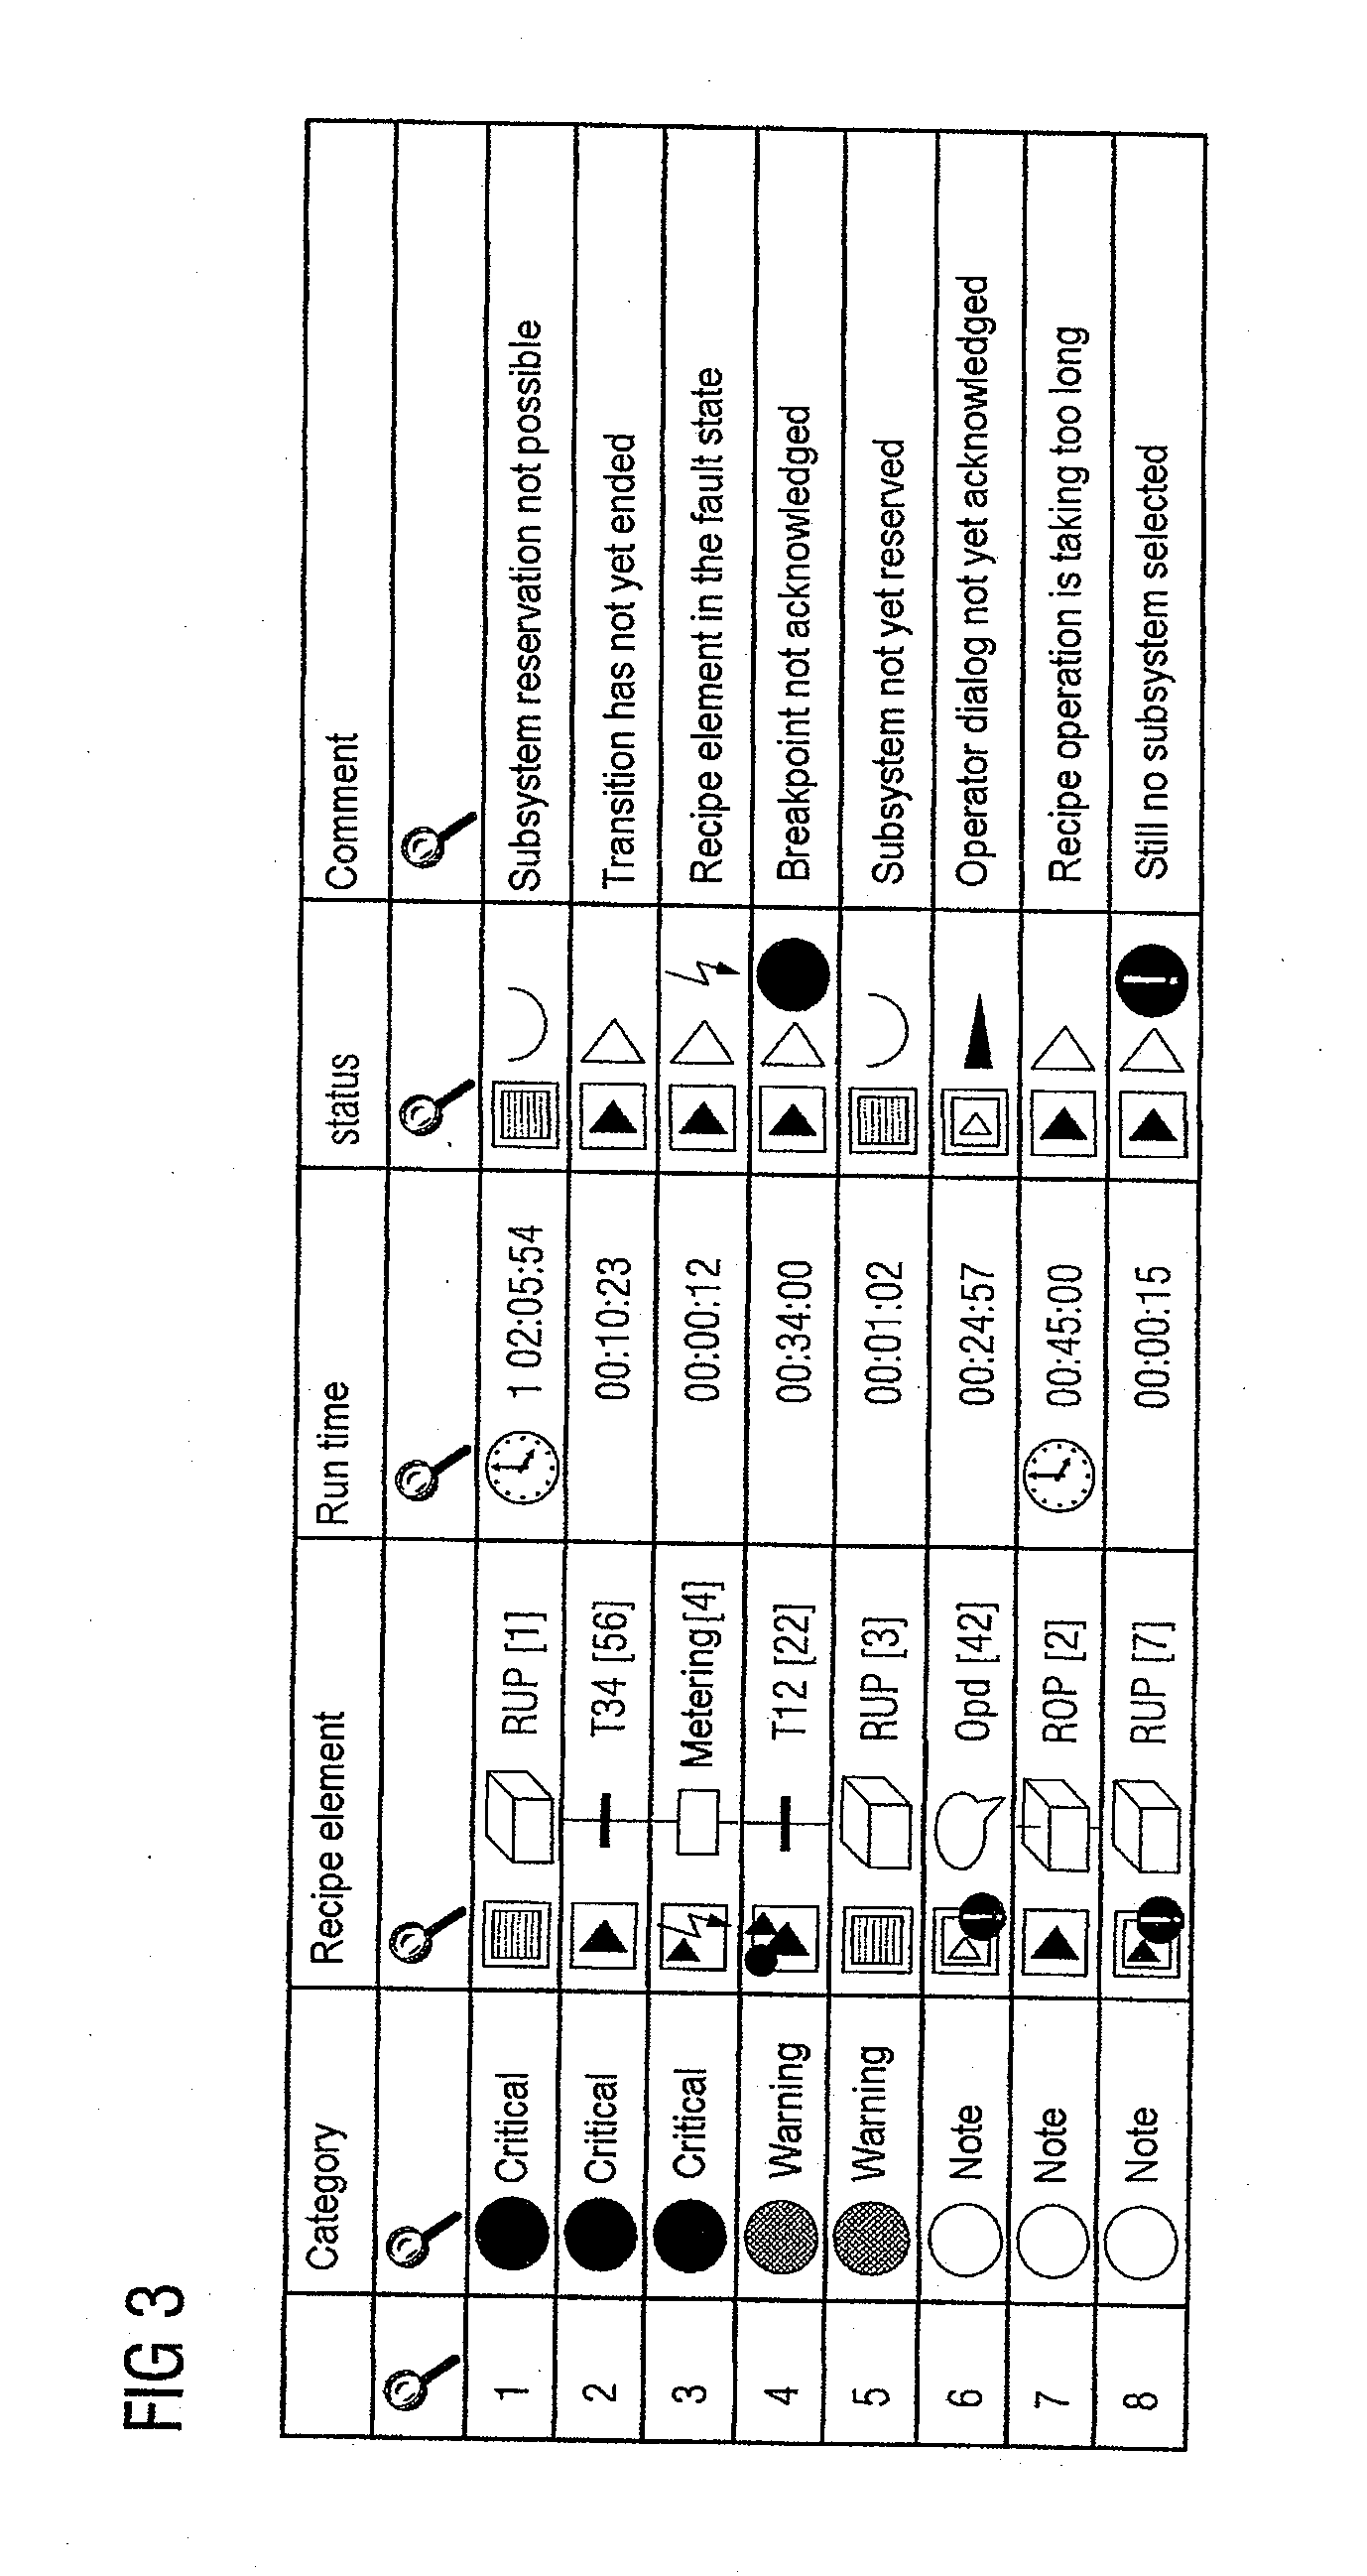 Method for Monitoring Sequencing of a Control Recipe for a Batch Process